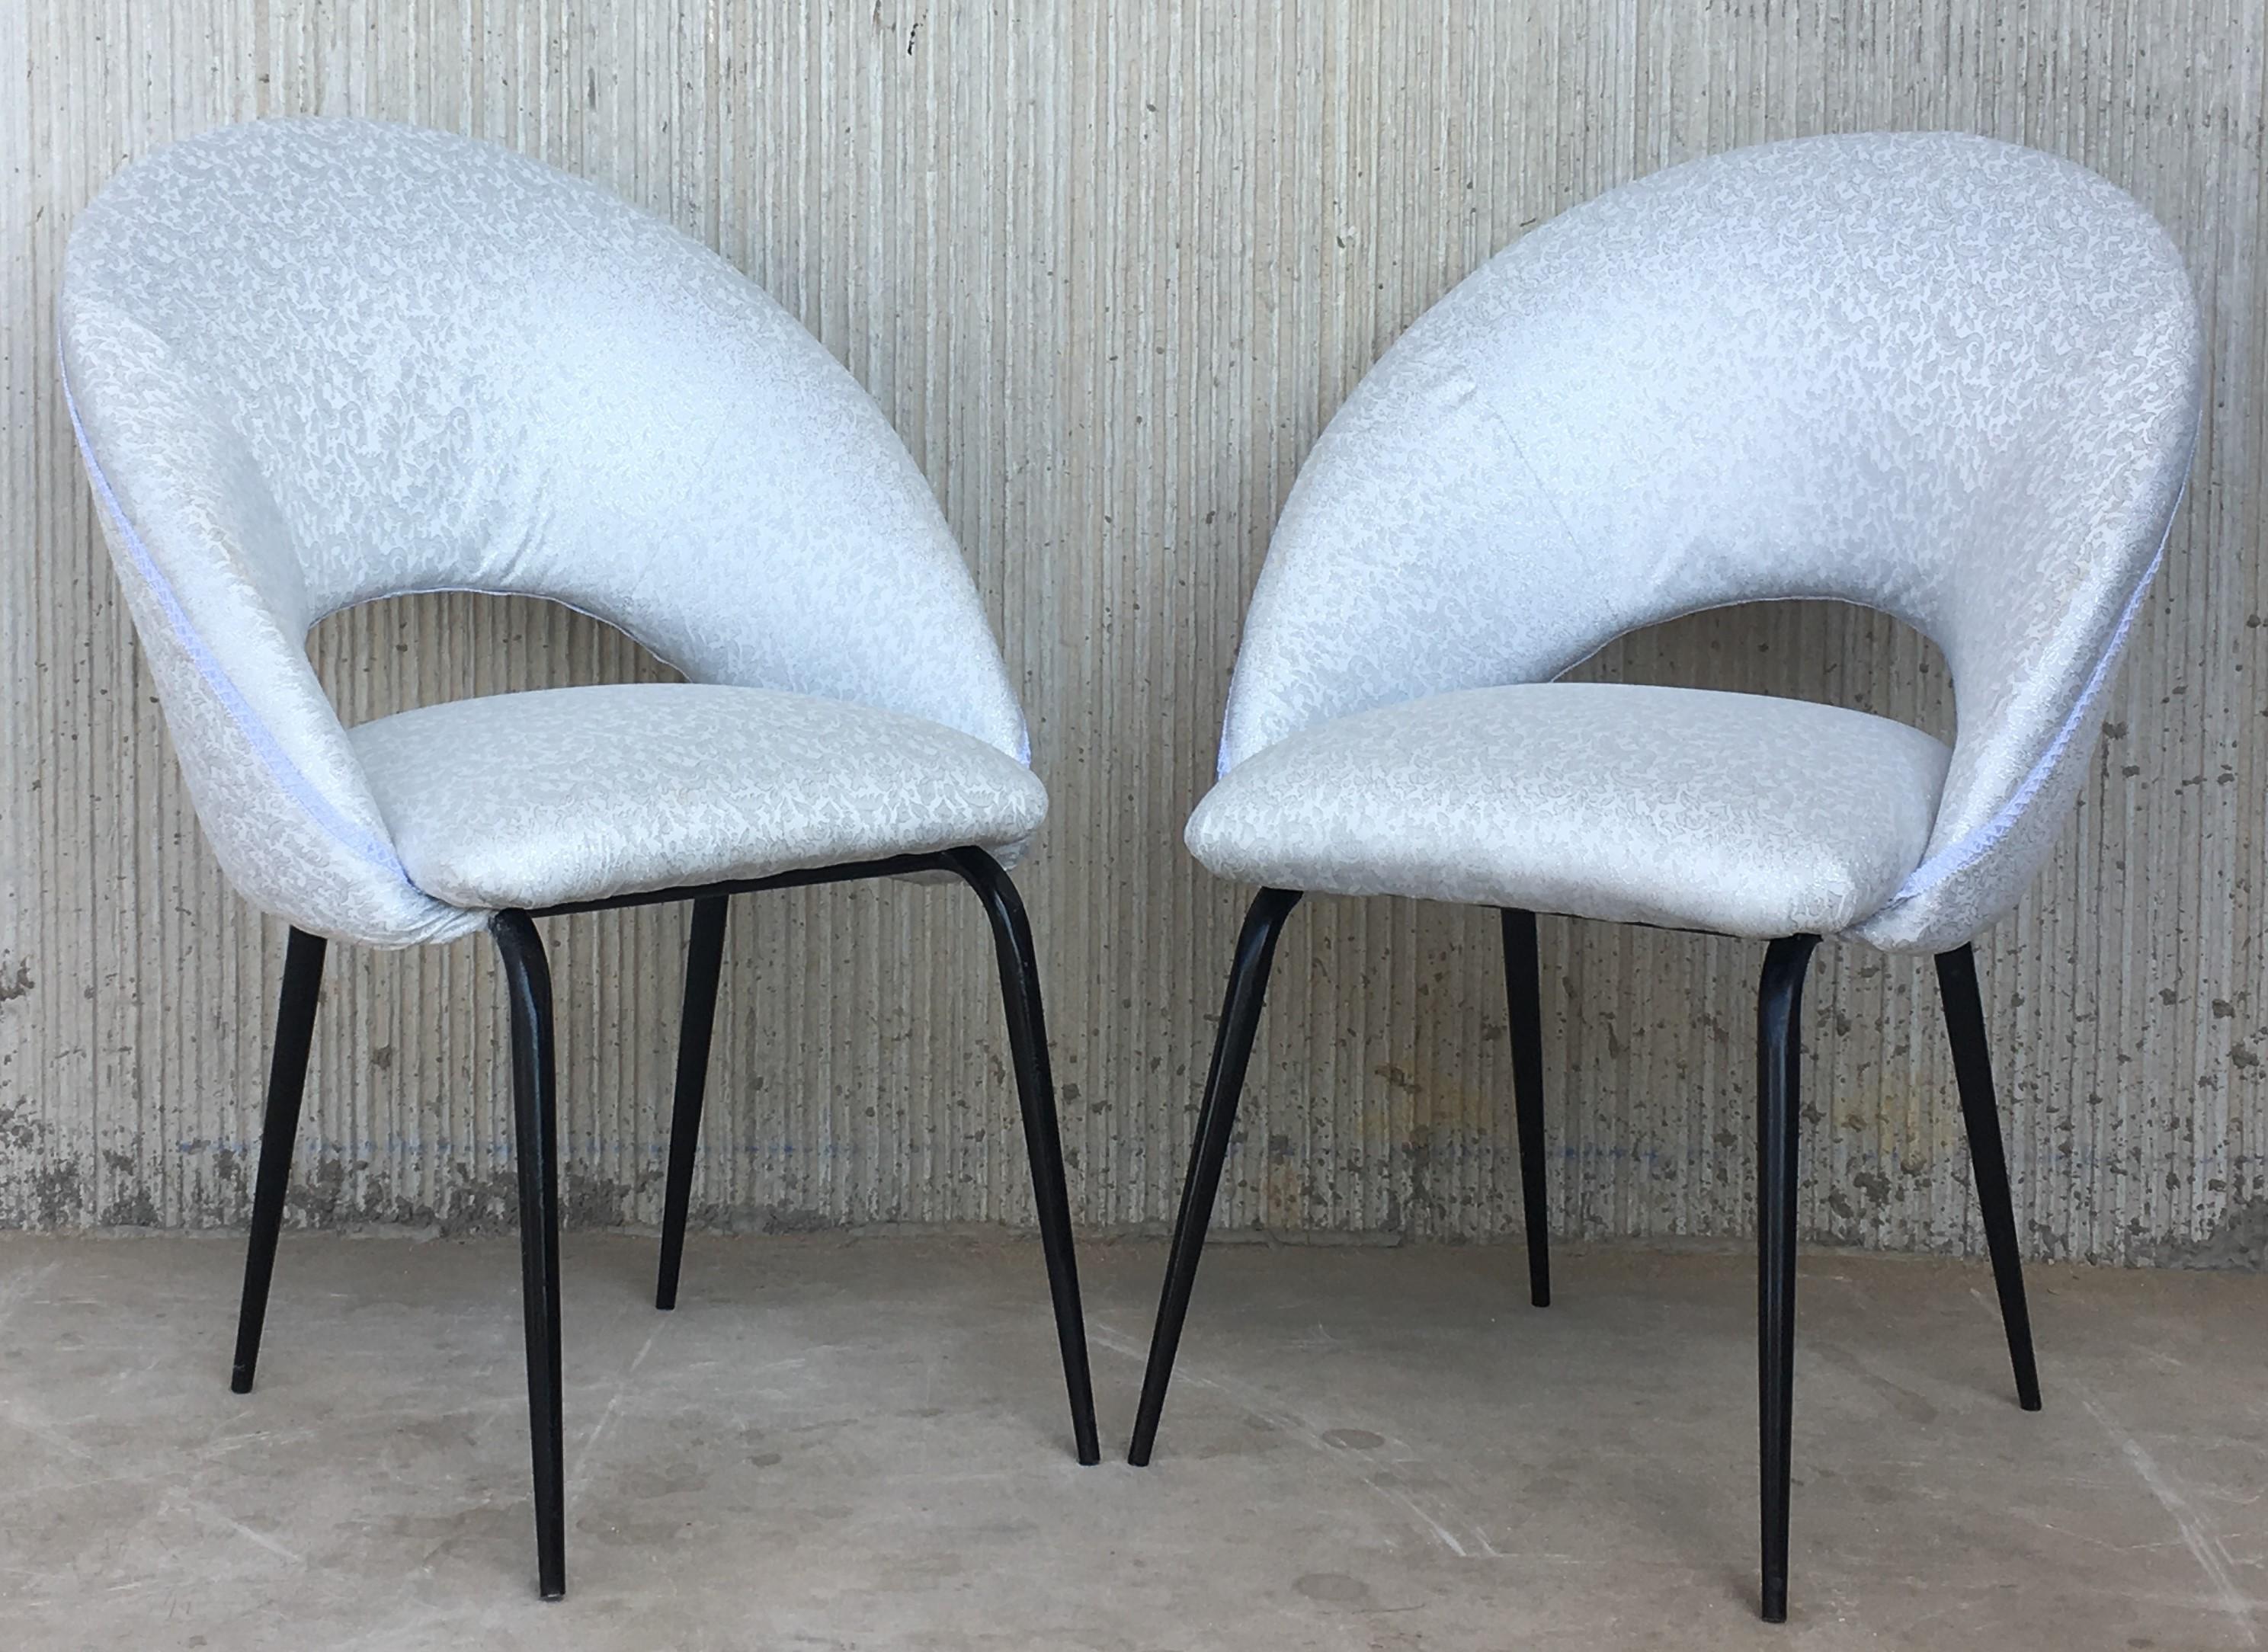 Mid-Century Modern Midcentury Pair of Italian Chairs with Arched Seats and Arched Backrest